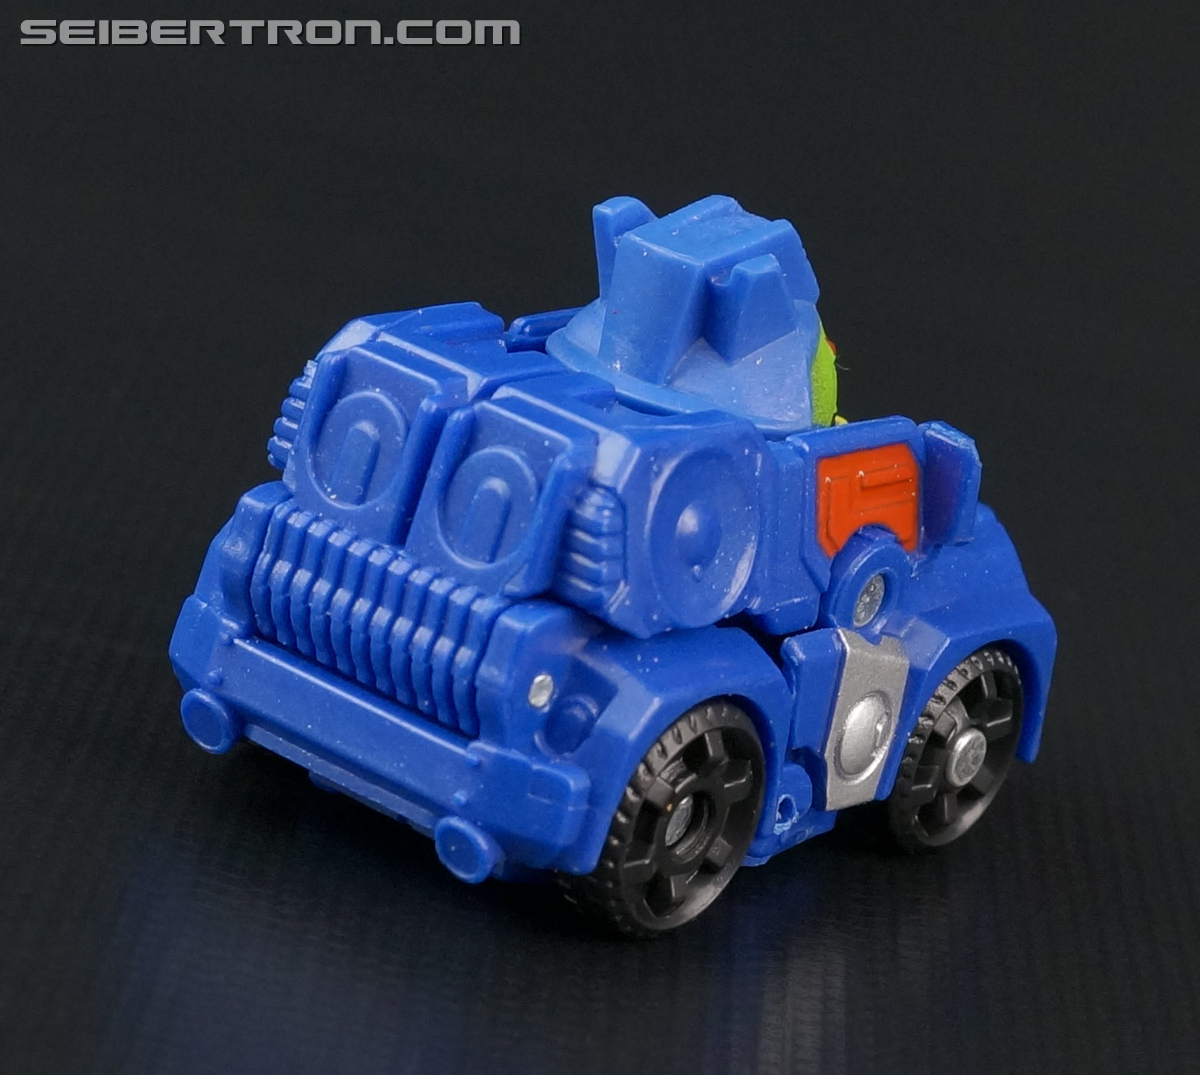 Angry Birds Transformers Soundwave Pig Toy Gallery (Image #13 of 69)